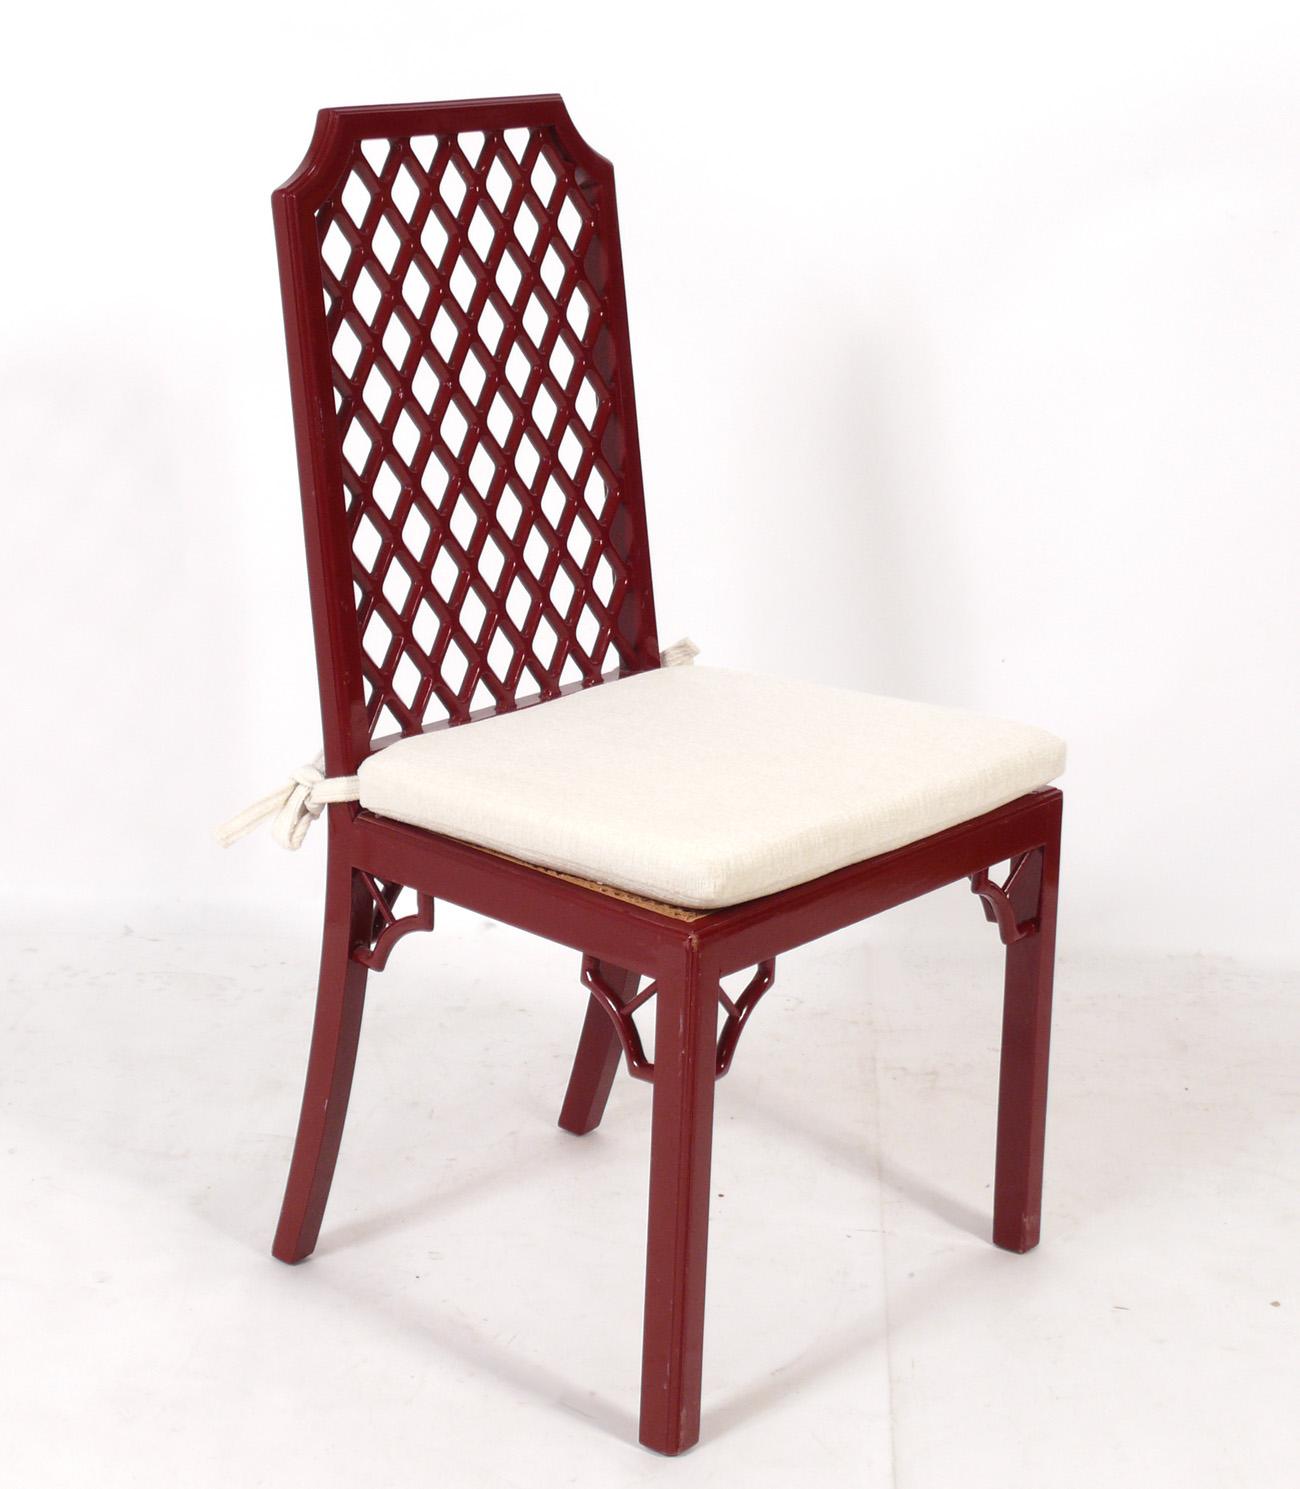 Chinese Red Lacquer Lattice Dining Chairs  In Good Condition For Sale In Atlanta, GA